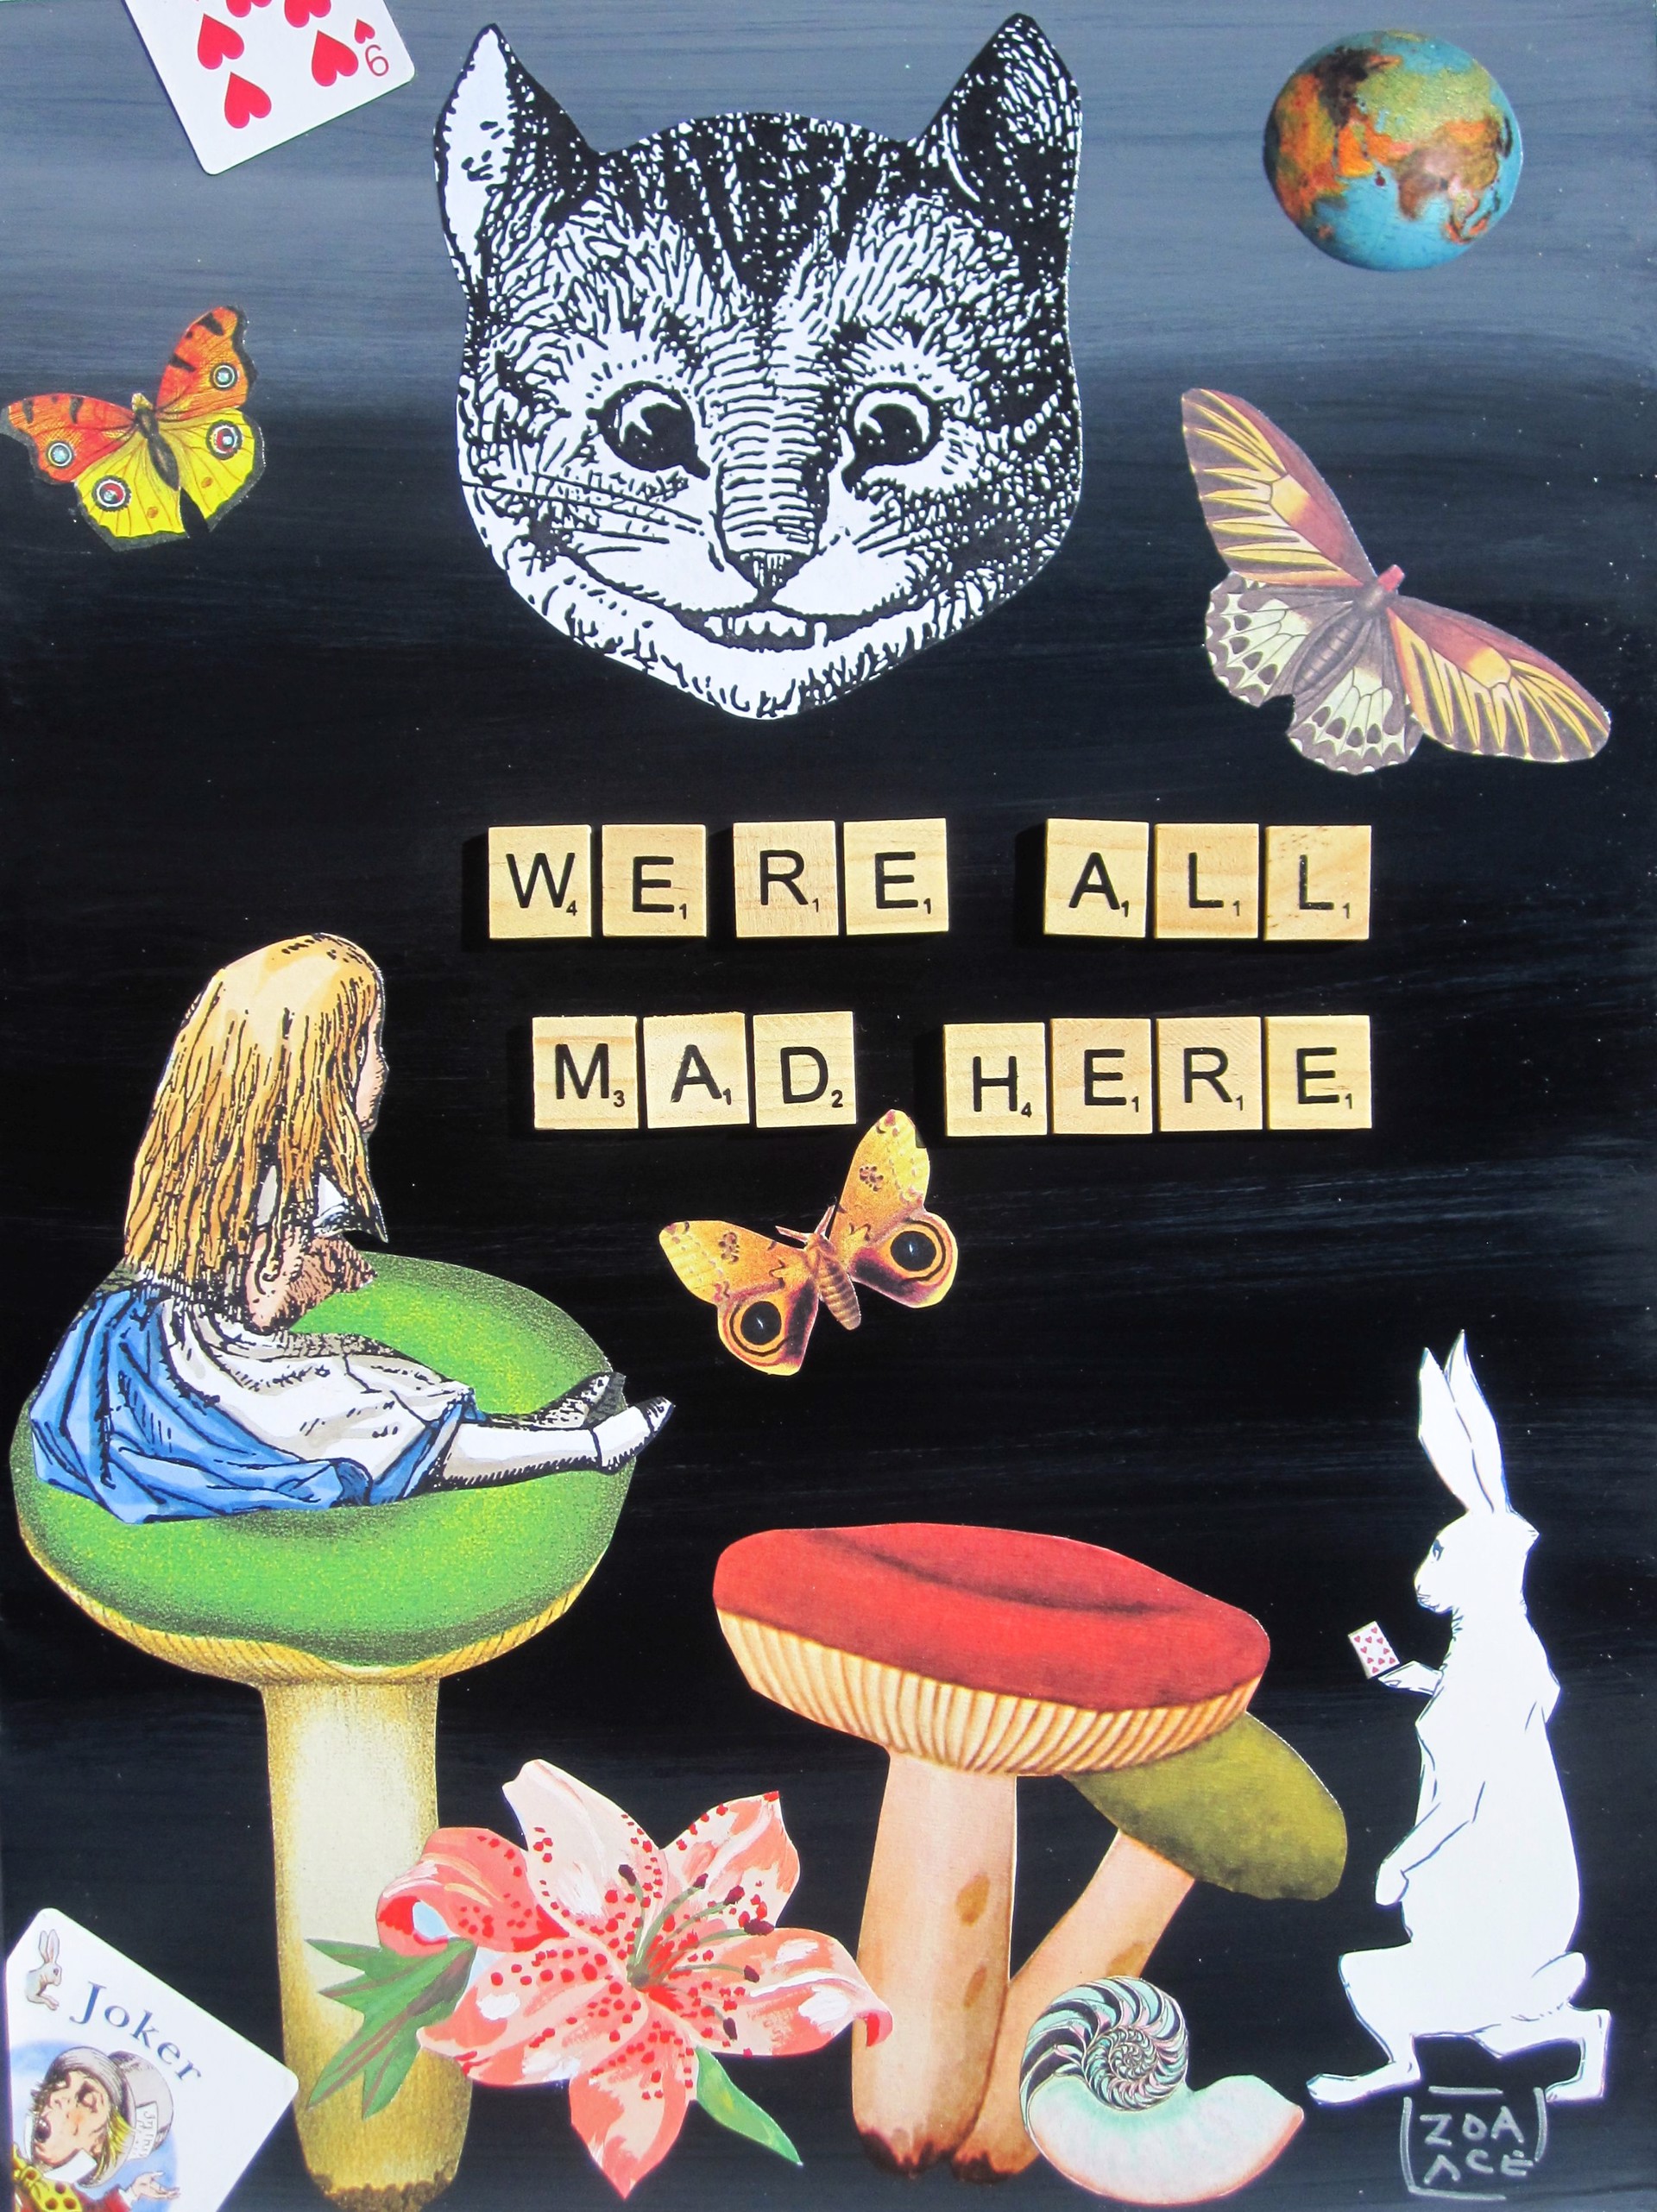 We're All Mad Here by Zoa Ace